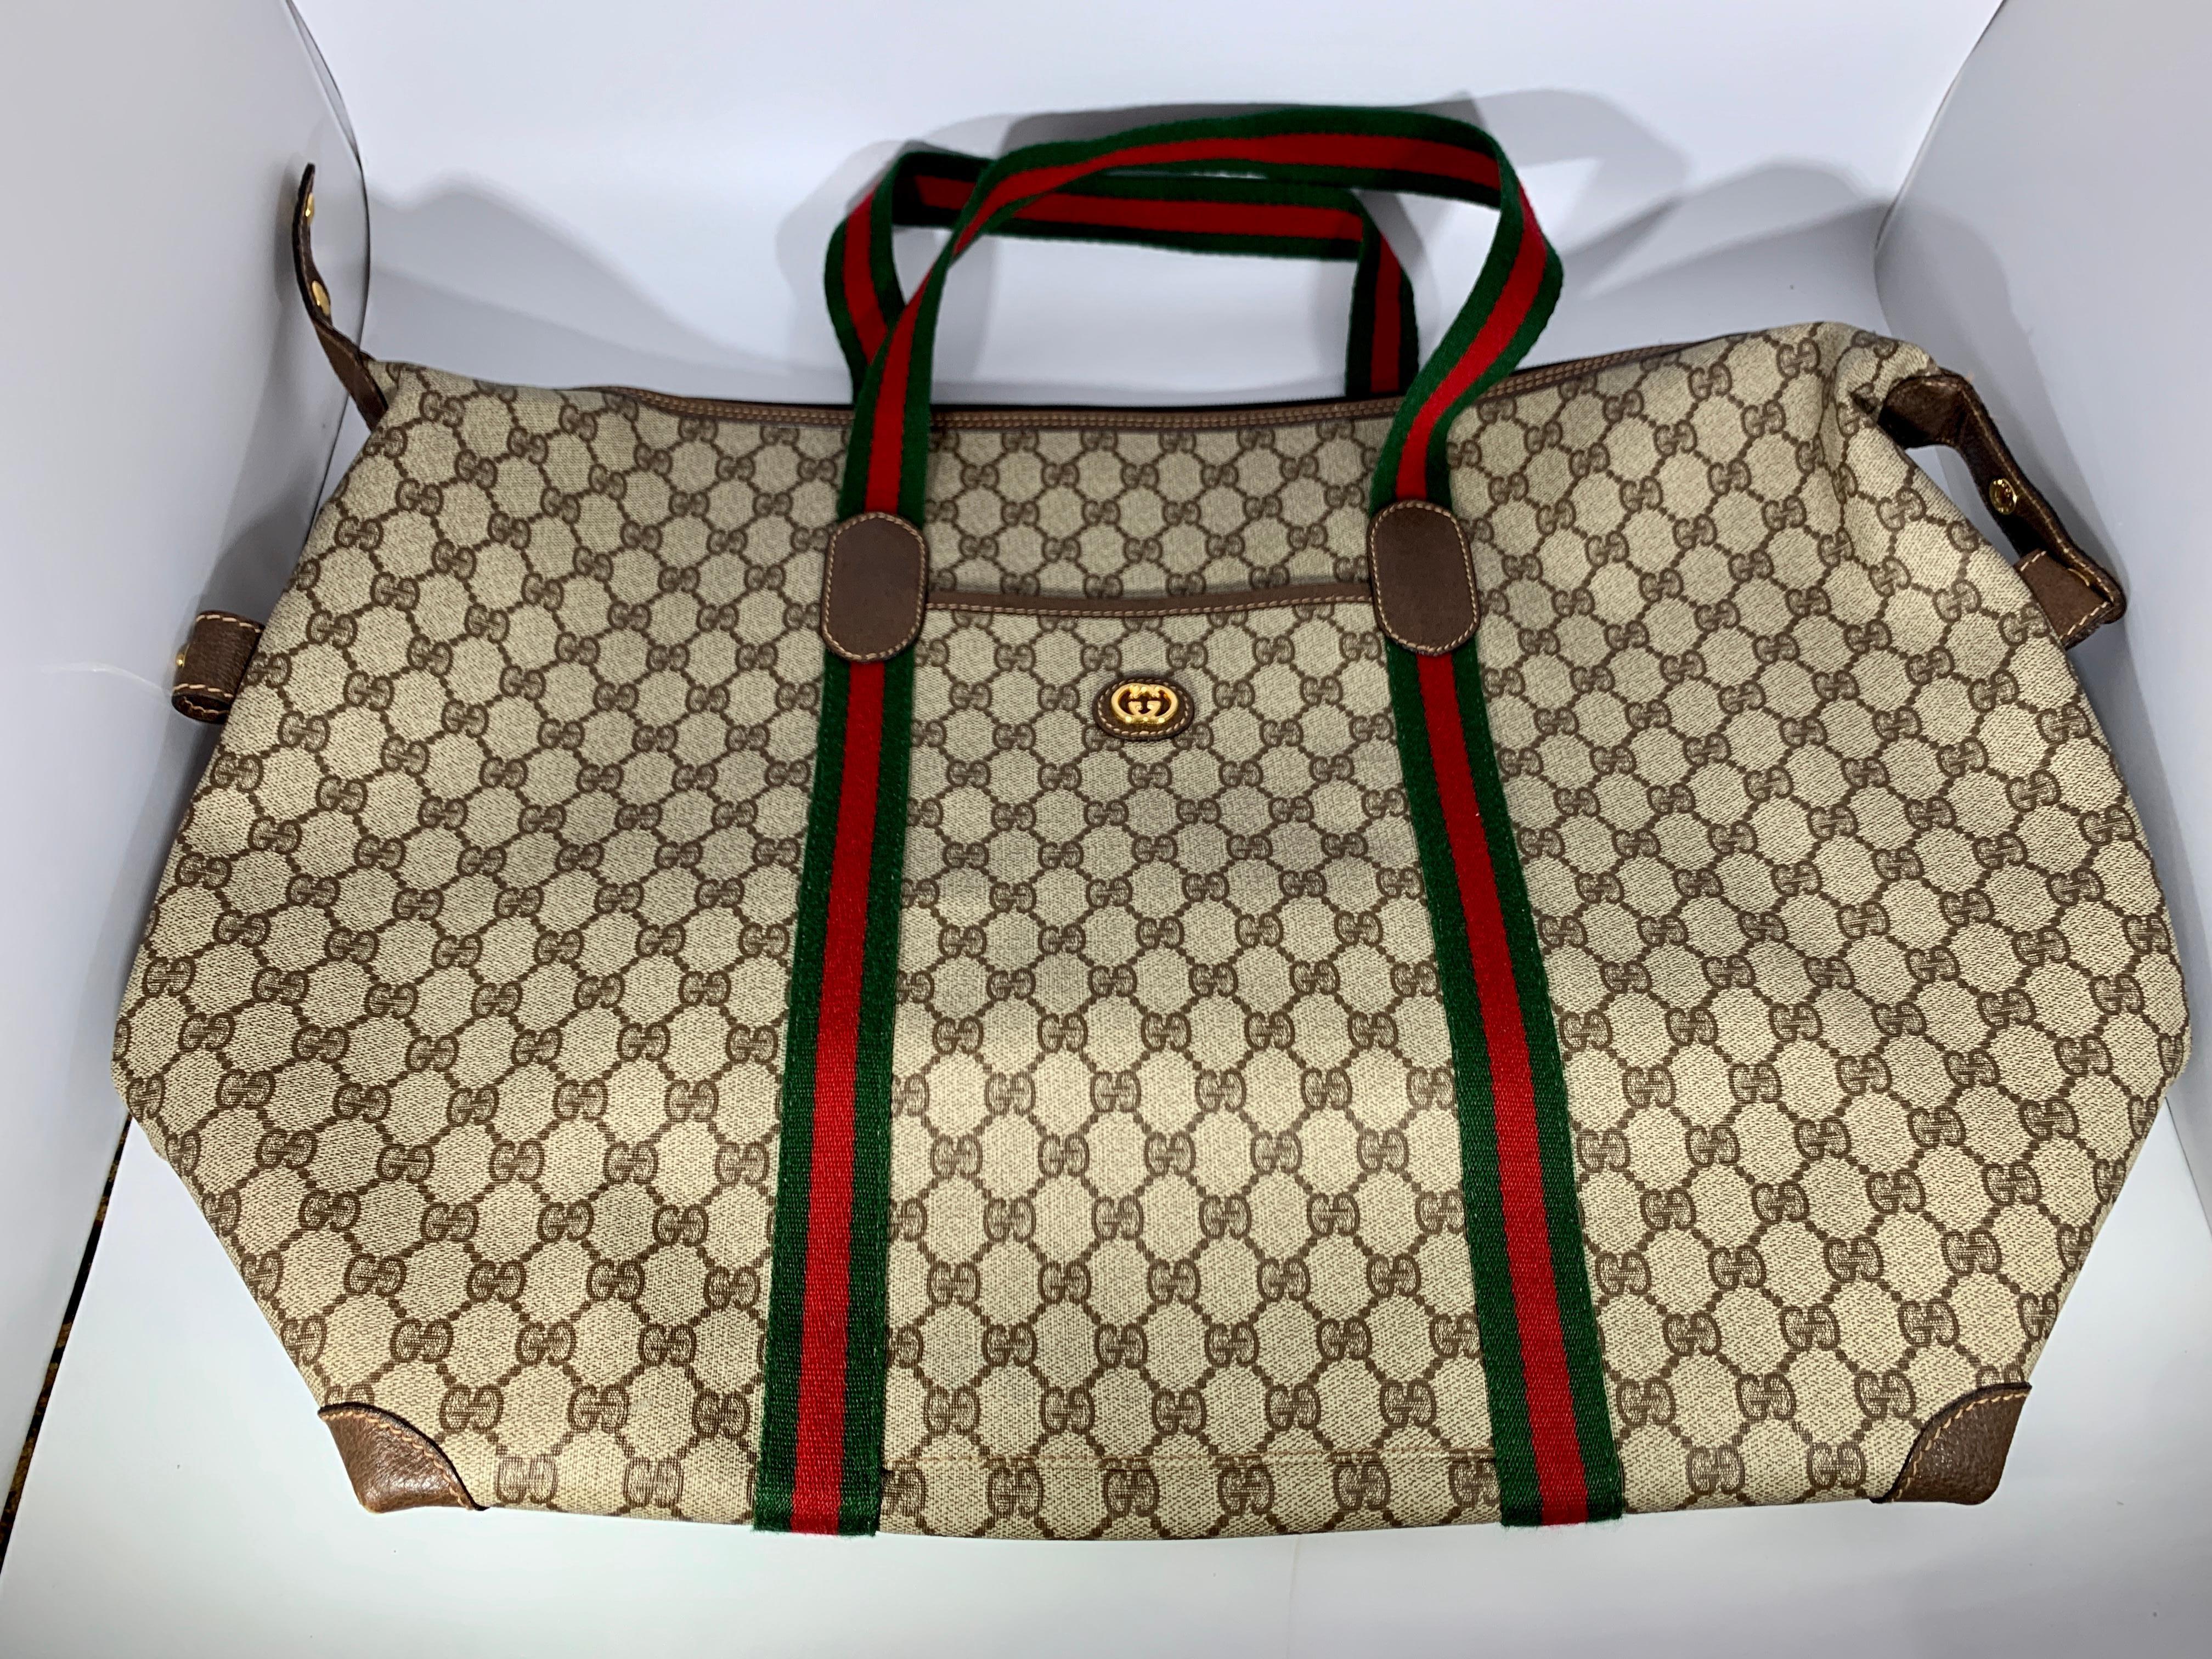 Gucci Plus Vintage Tan Monogram Canvas Large Tote Shoulder Bag Striped Handles
This is an Authentic Vintage Gucci Plus Webby large Tote
Vintage are in!!! They are hard to find and it is in excellent used condition
Top is zippered closed.
One pocket